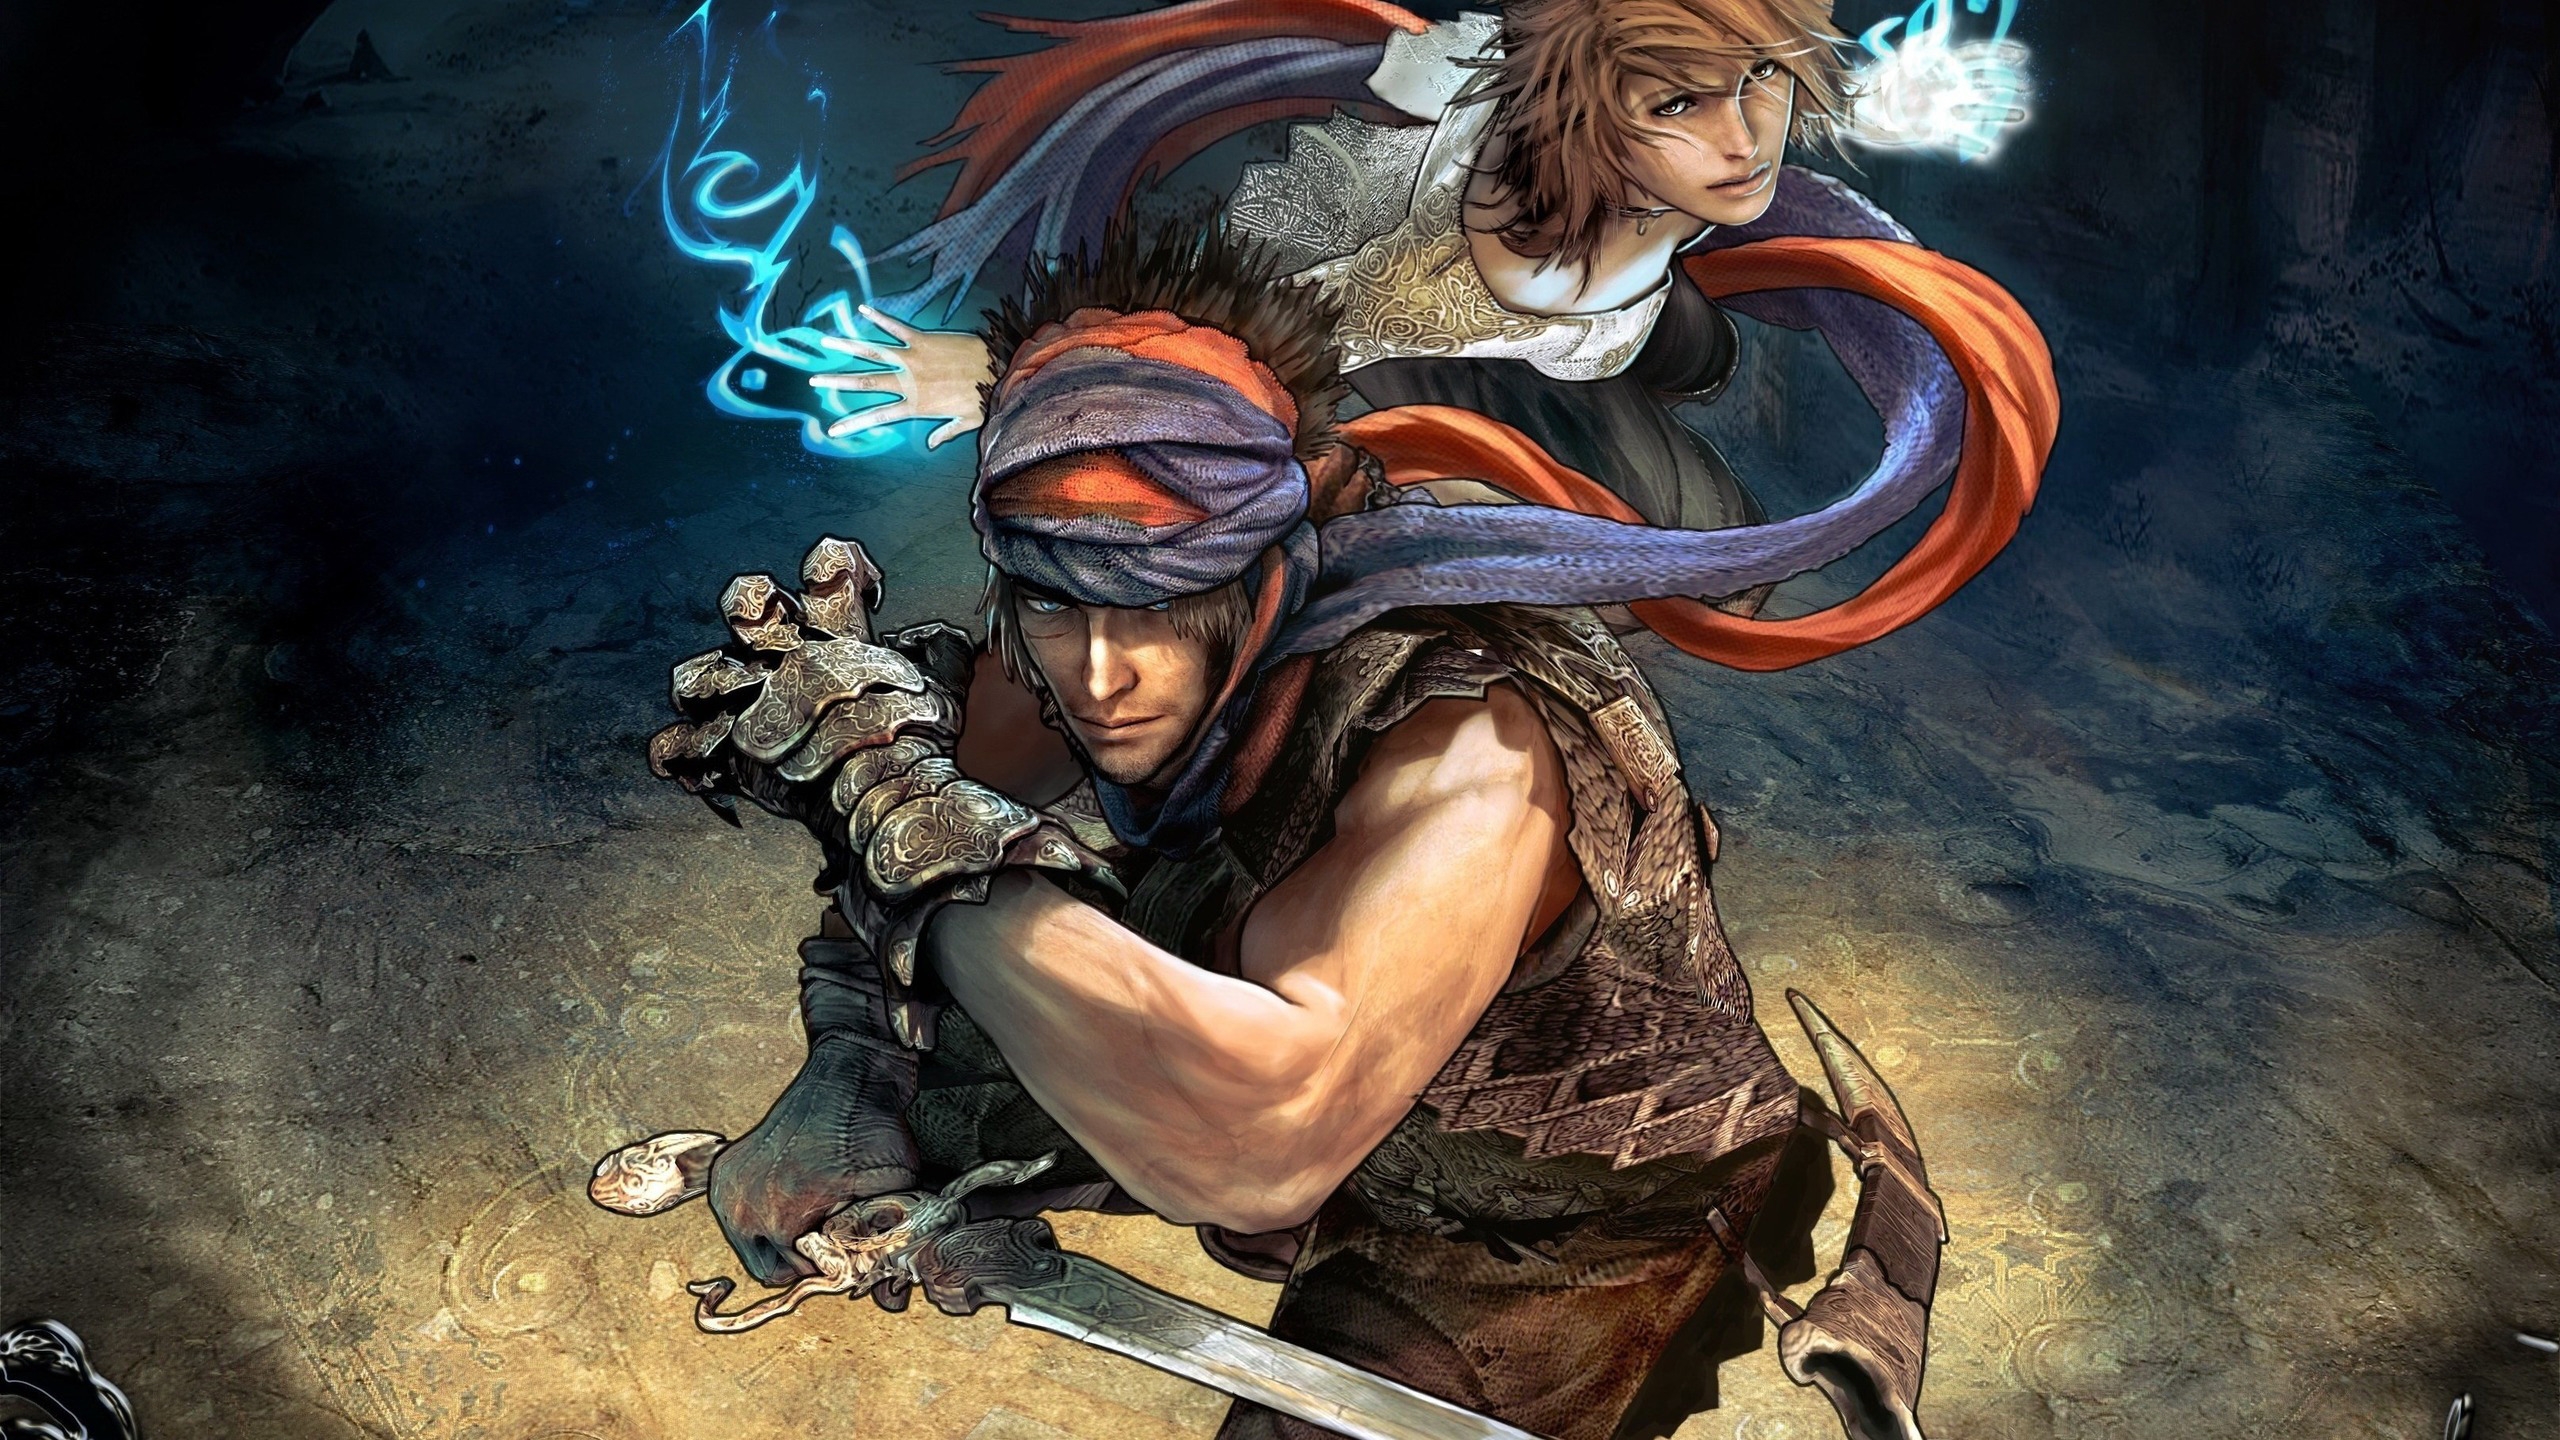 Prince of Persia Epilogue for 2560x1440 HDTV resolution